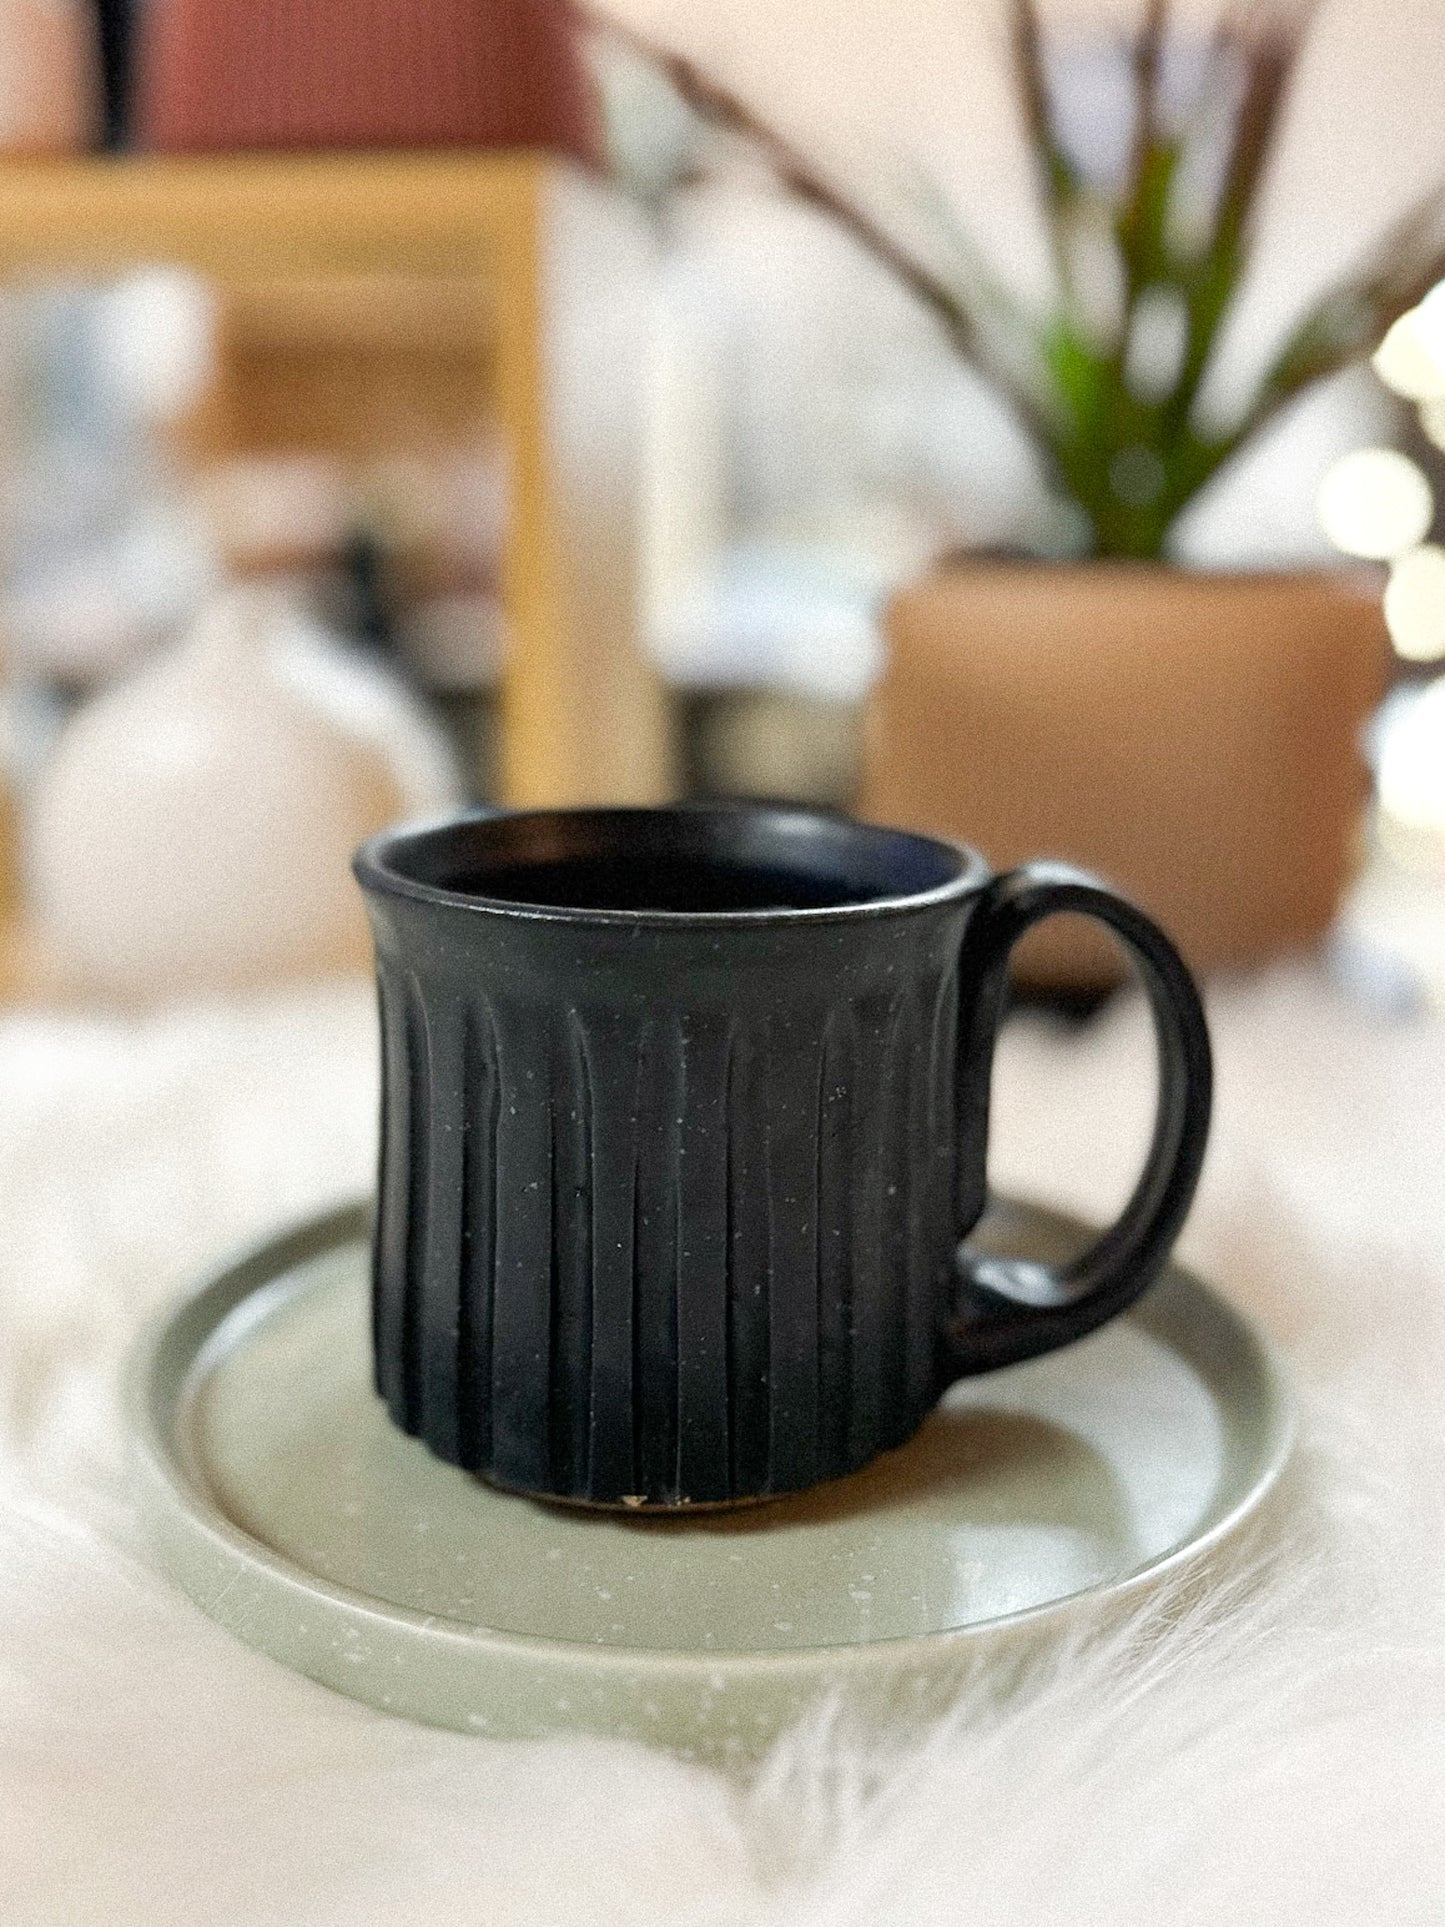 Black Carved Vertical Stripes Mug by Night School Knits and Pots #30